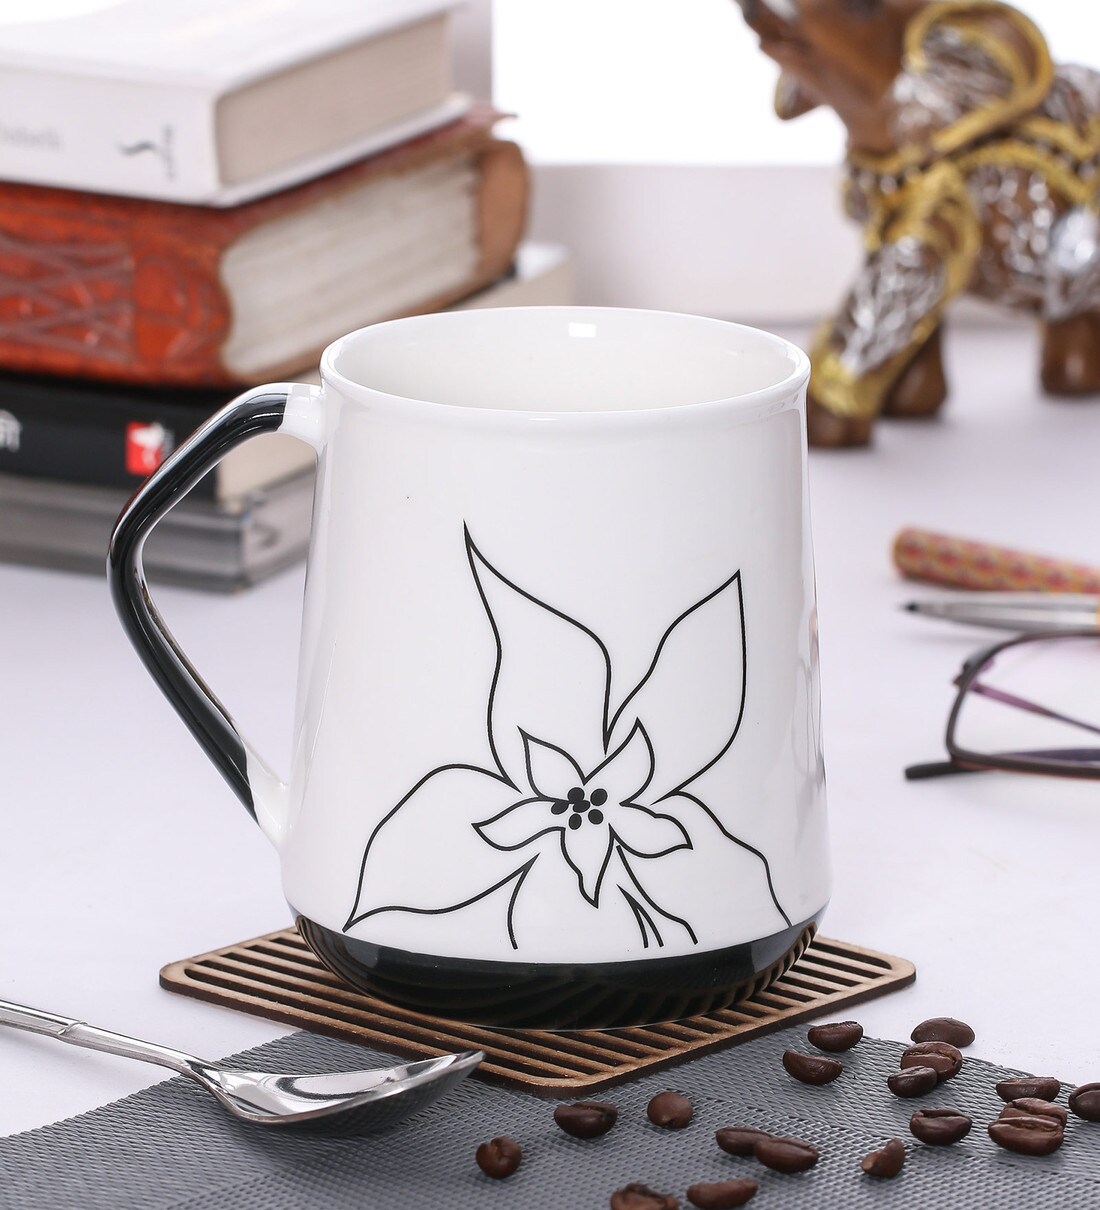 Buy 350 Ml White Porcelain Printed Big Size Coffee Mug By Jcpl Online Coffee Mugs Serveware Discontinued Pepperfry Product